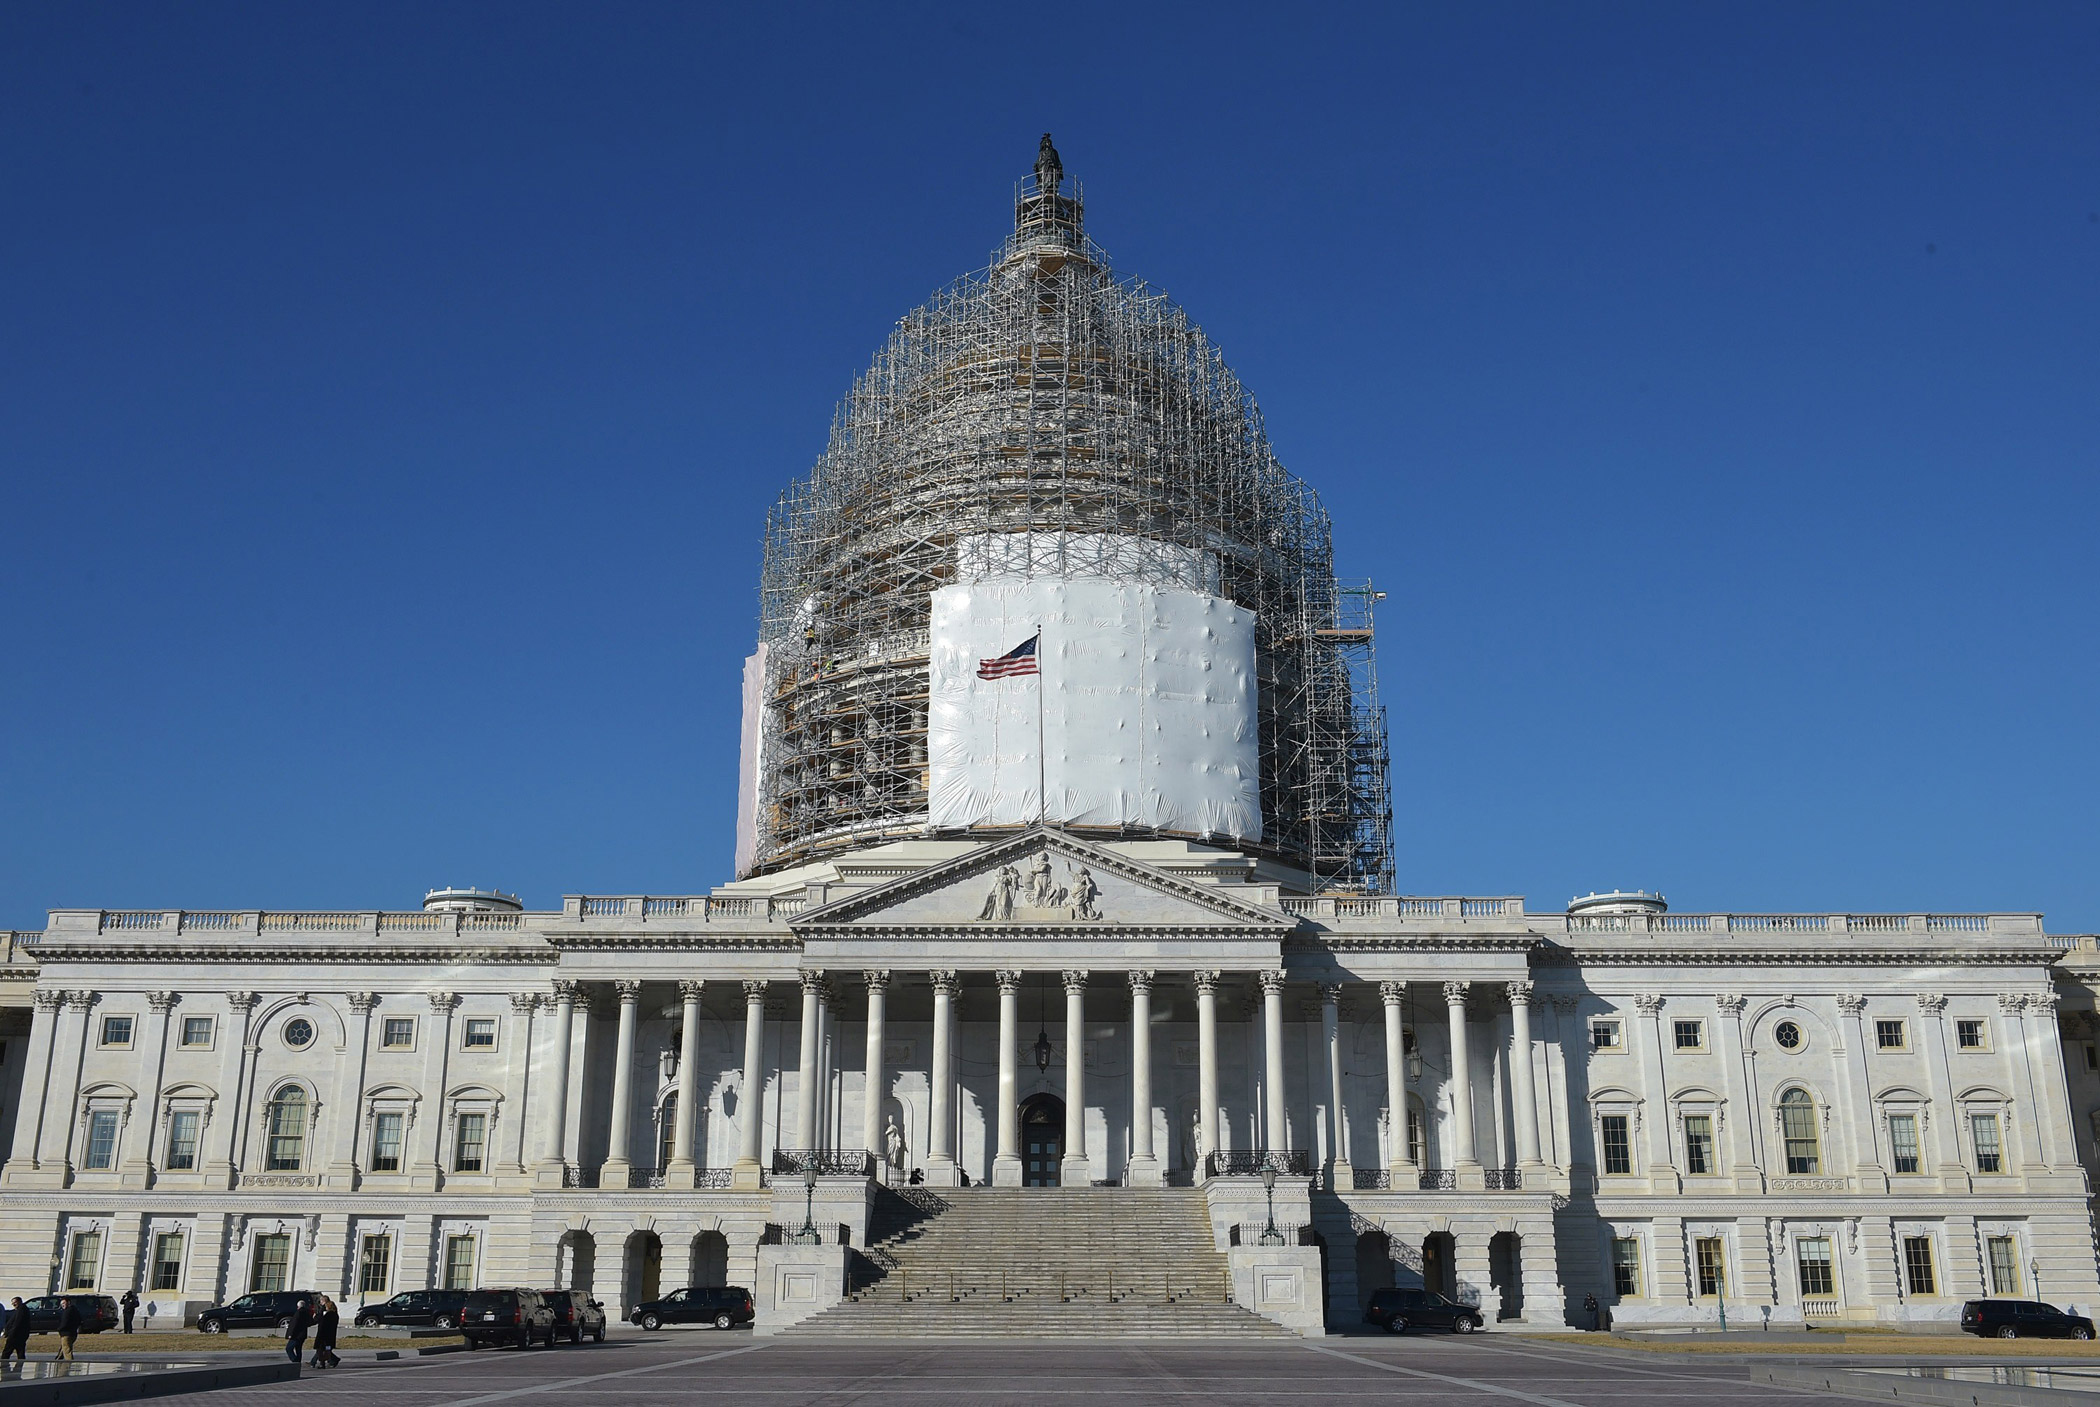 The U.S. Capitol dome, encased in scaffolding, is undergoing renovation in 2015. (MANDEL NGAN&mdash;AFP/Getty Images)